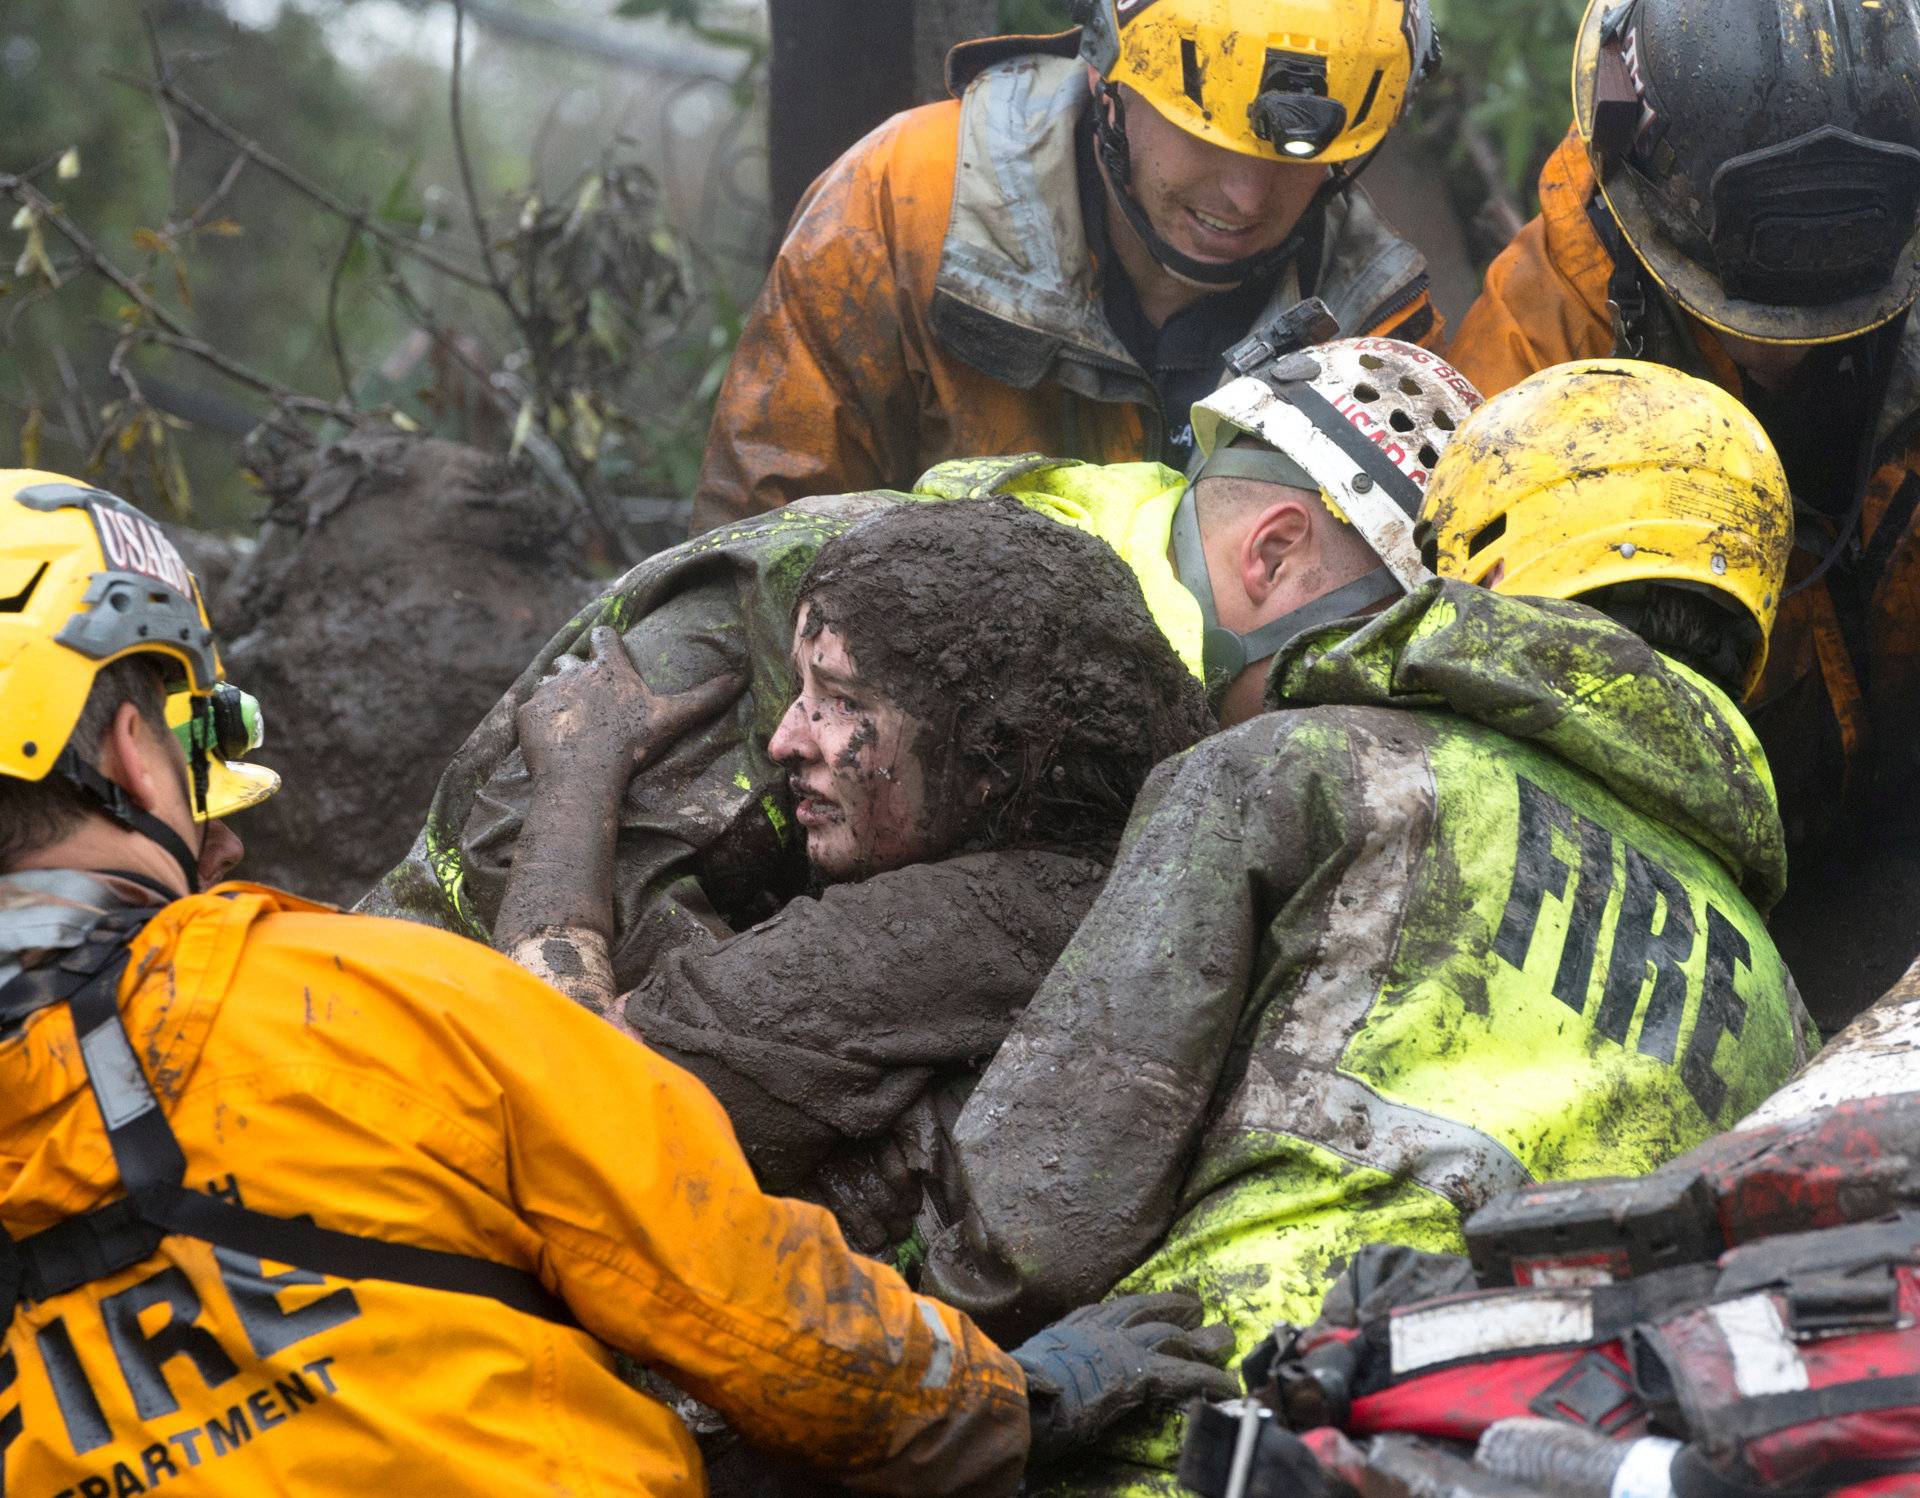 Emergency personnel carry a woman rescued from a collapsed house after a mudslide in Montecito